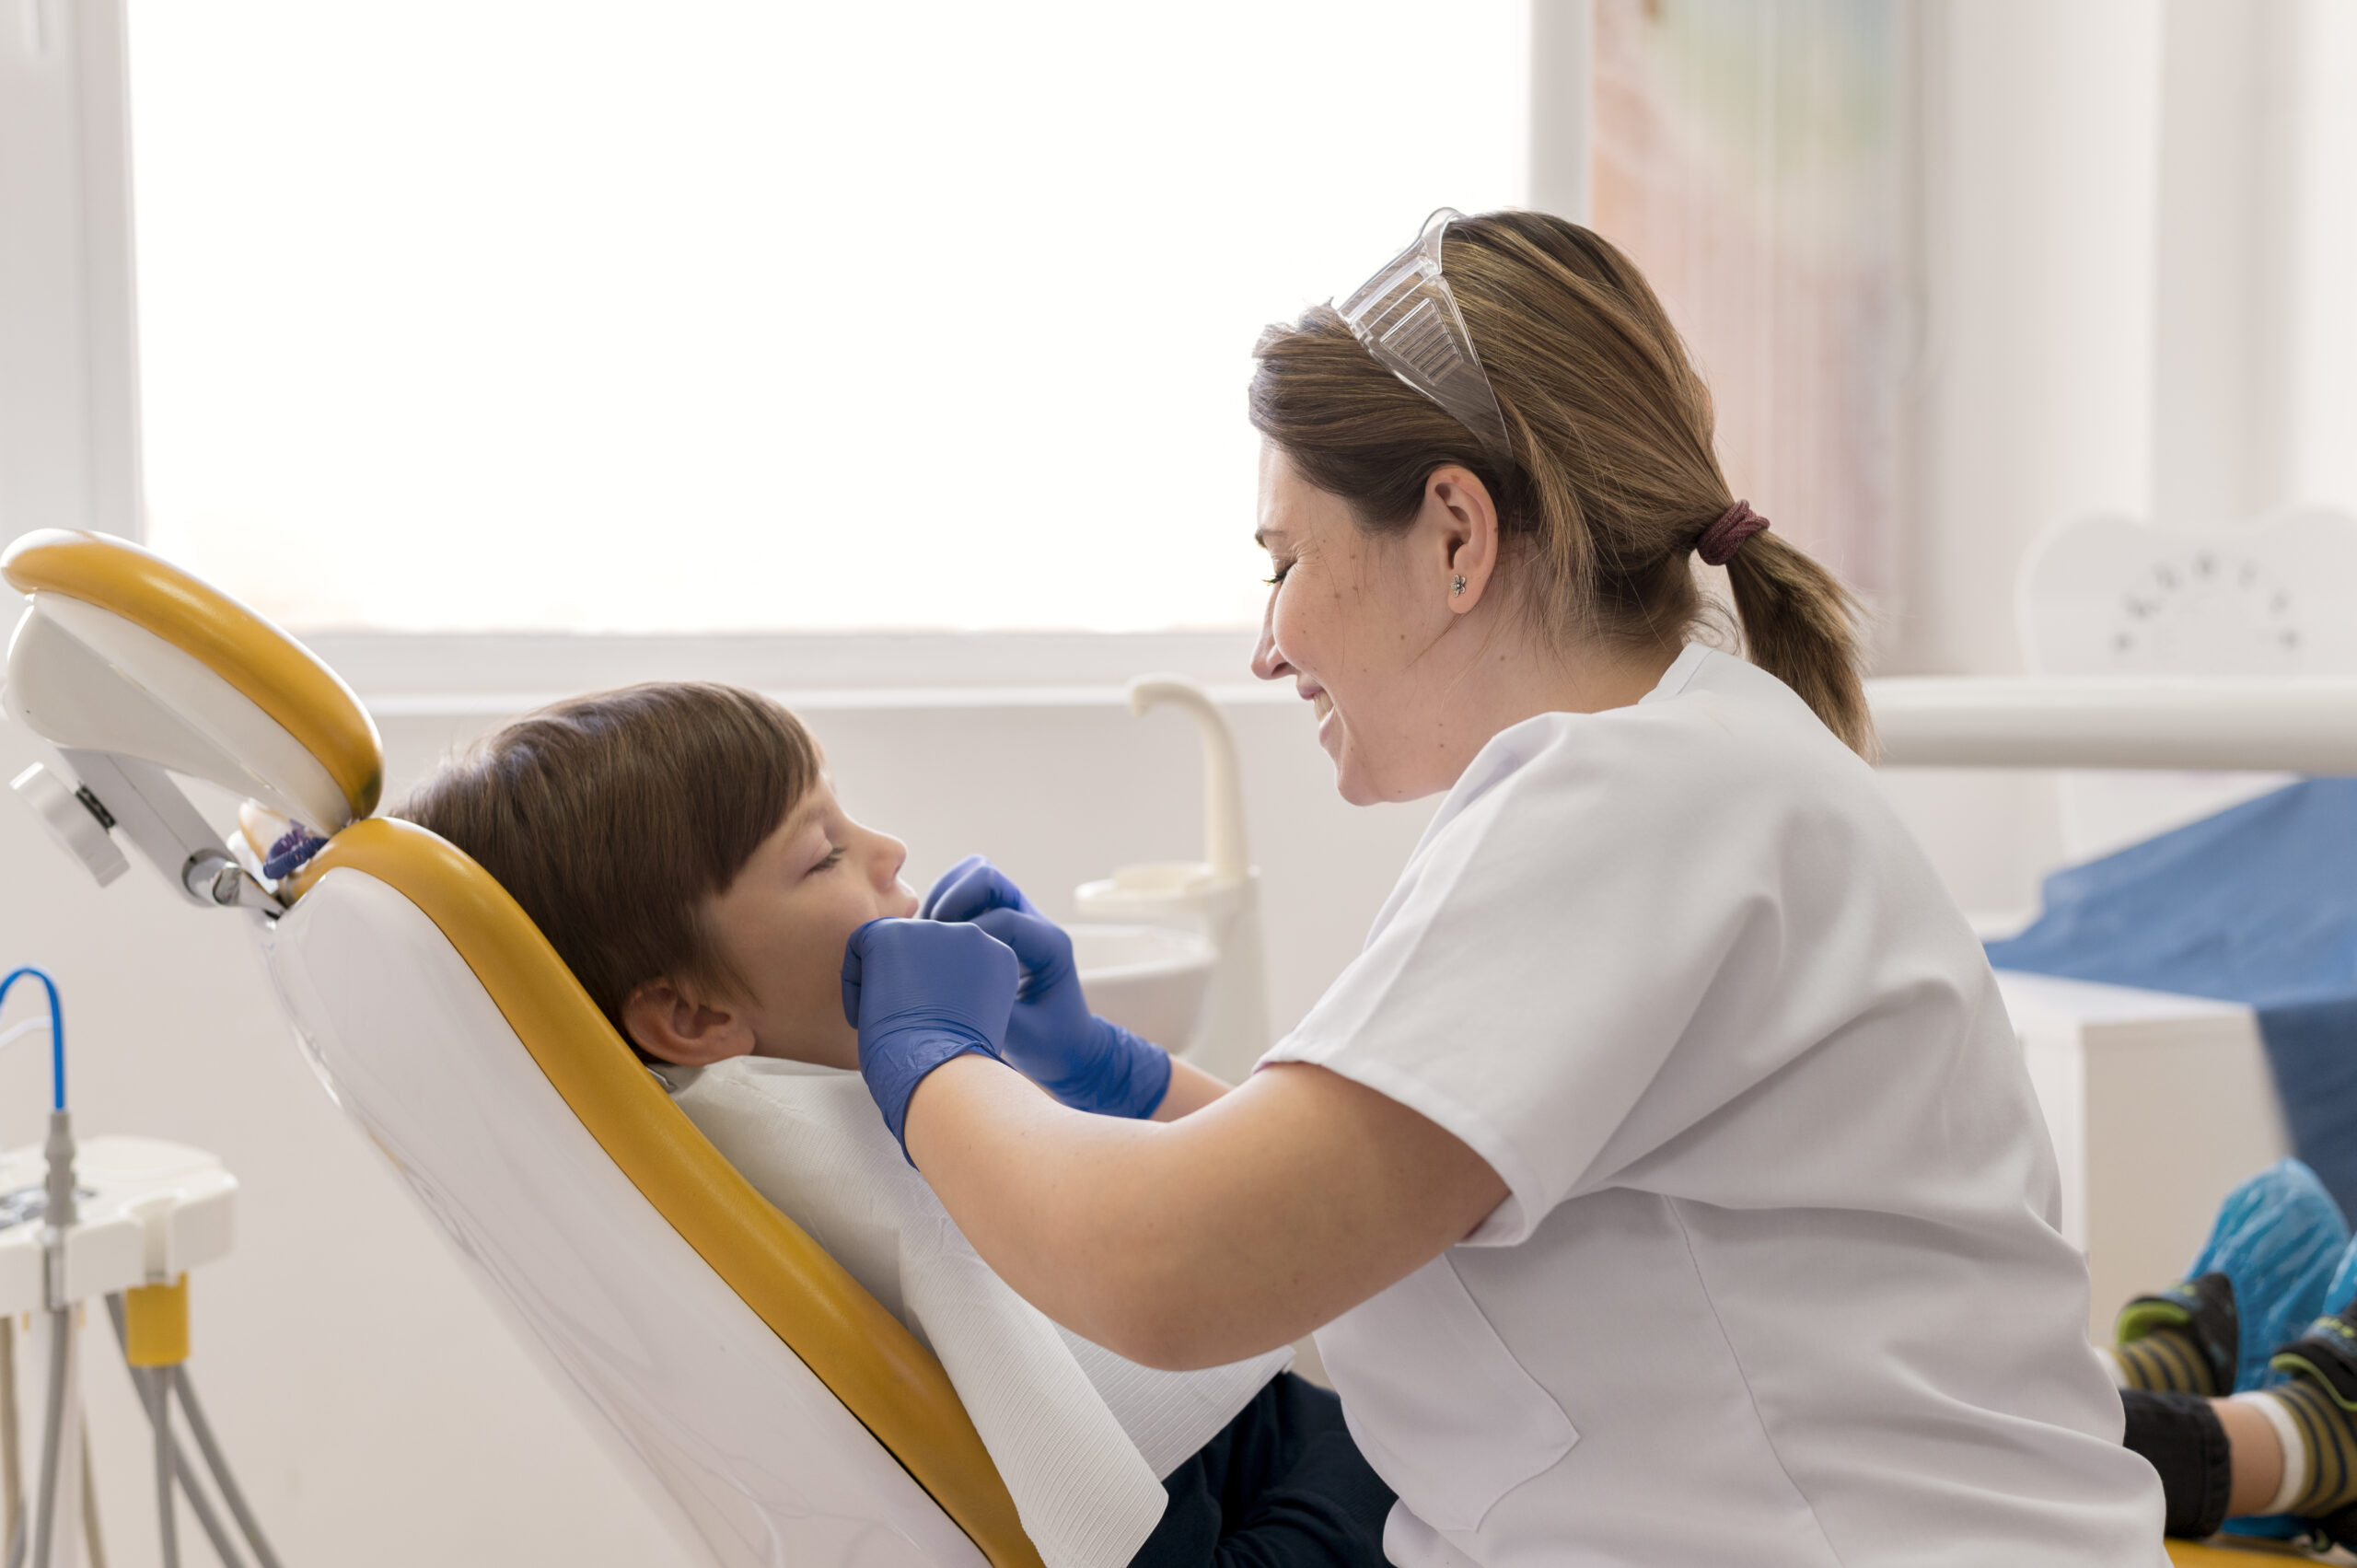 Dental Implants for Children: Considerations and Alternatives